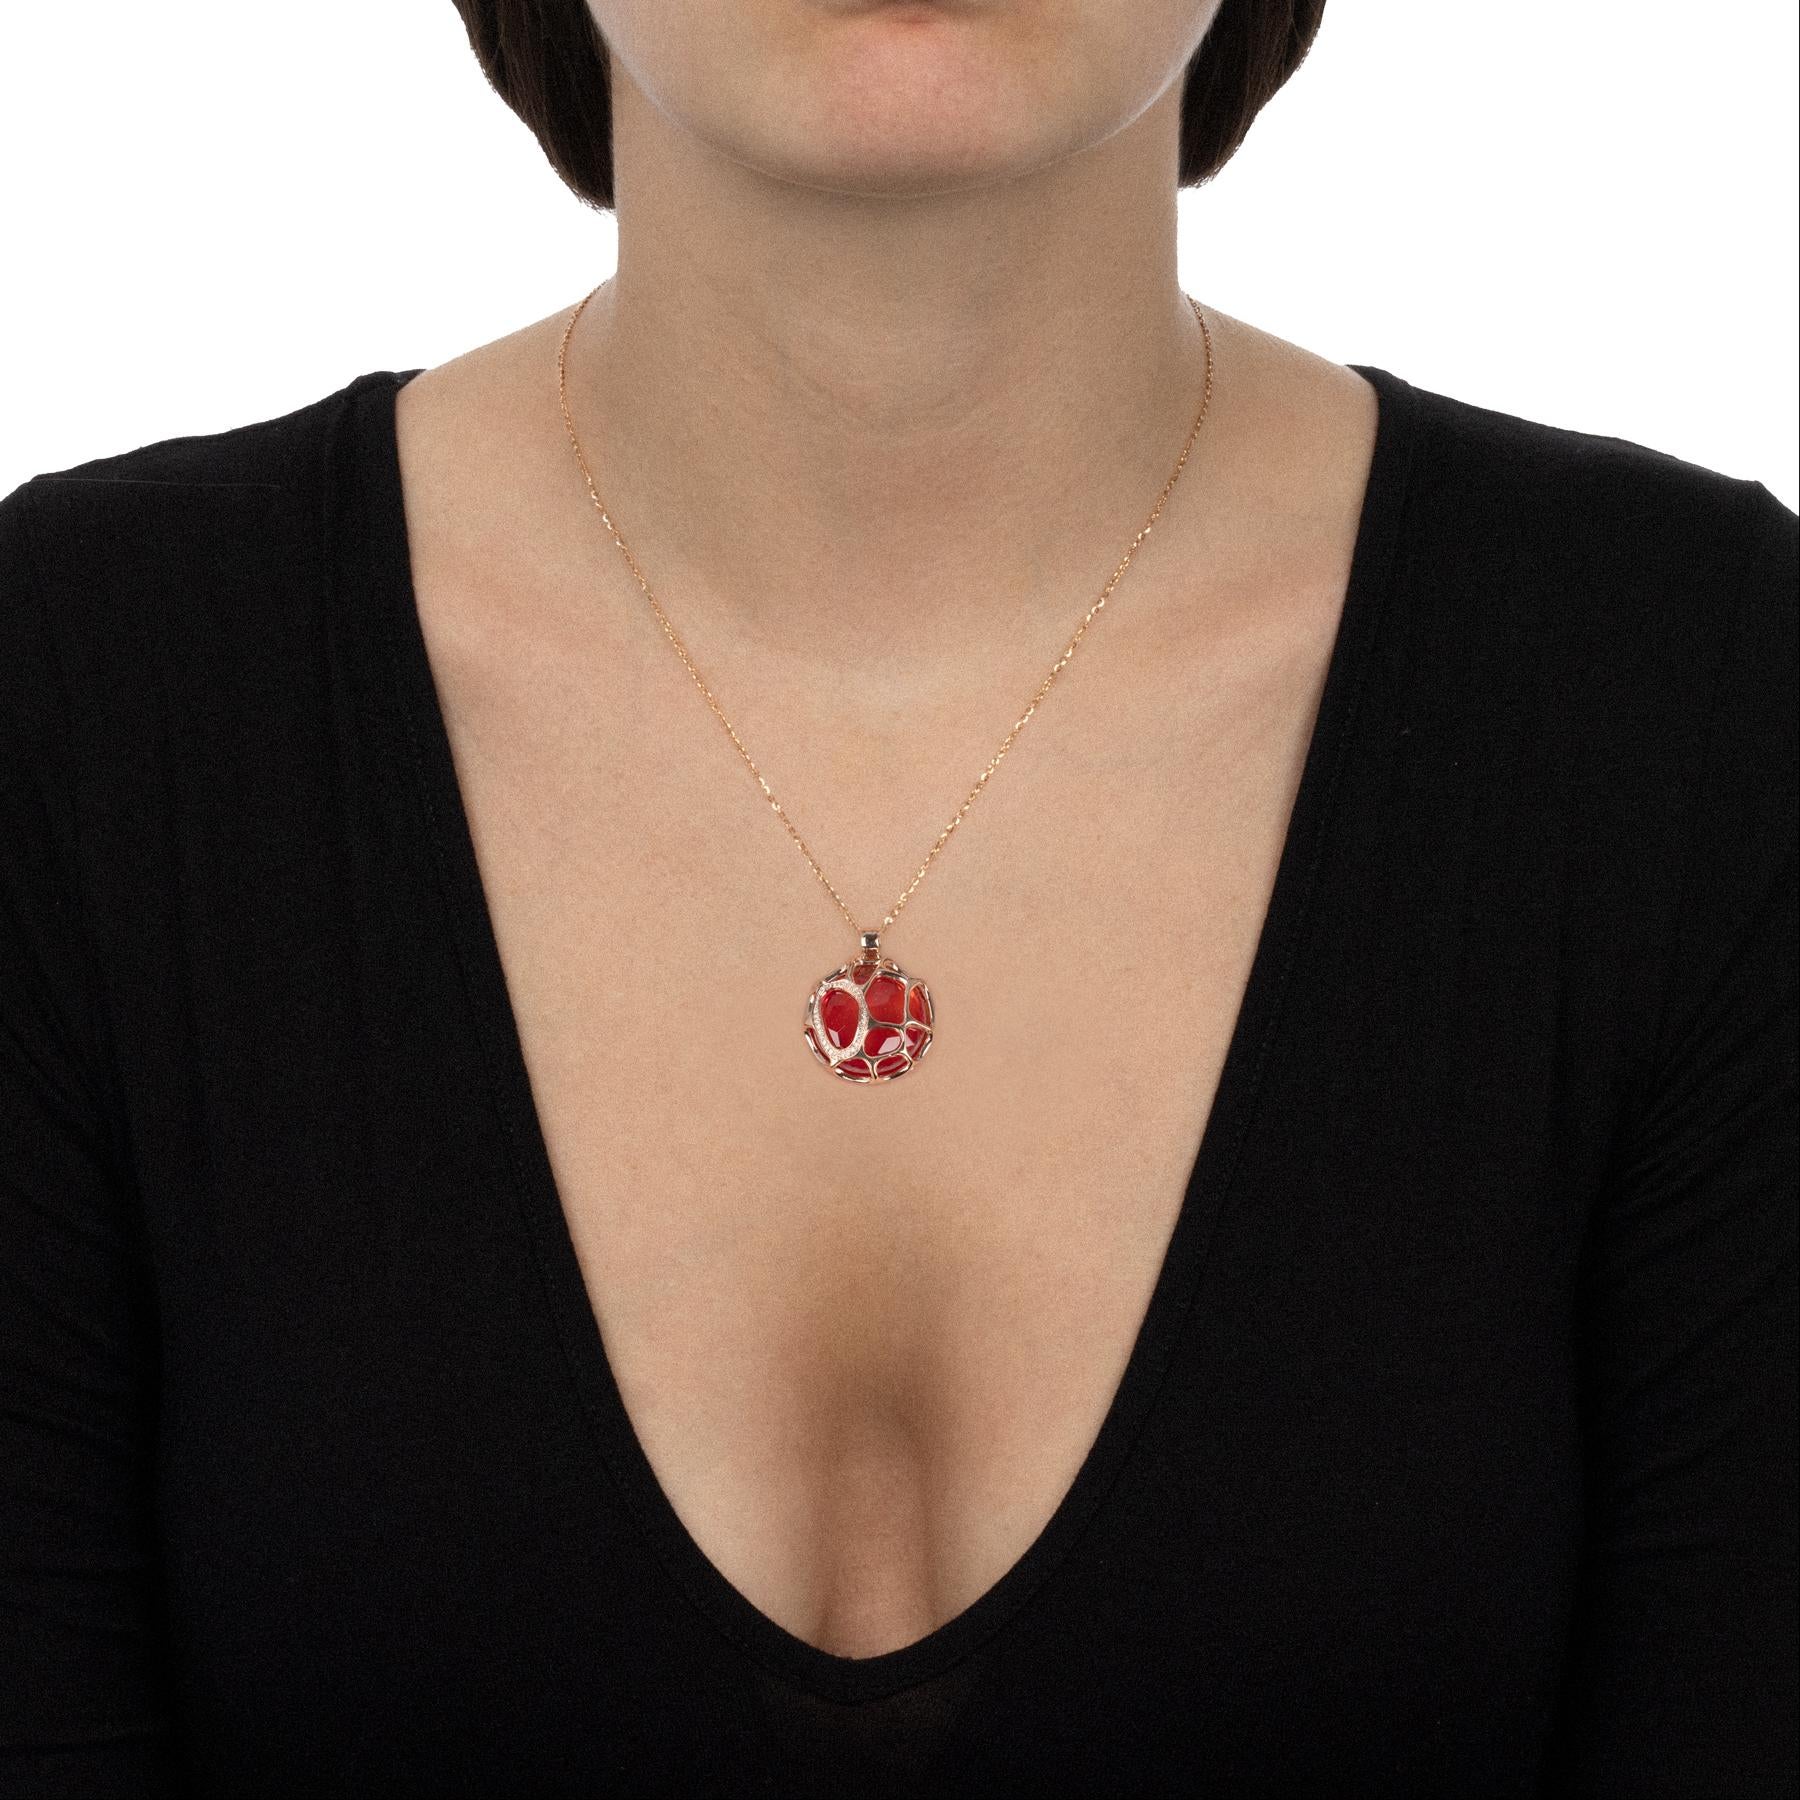 A playful, yet classy pendant necklace that captures the fresh joy of a summer holiday. The vibrant red shade of the crystal pendant is highlighted by the sparkling brightness of the small diamonds. The delightfully elegant rose gold decoration and